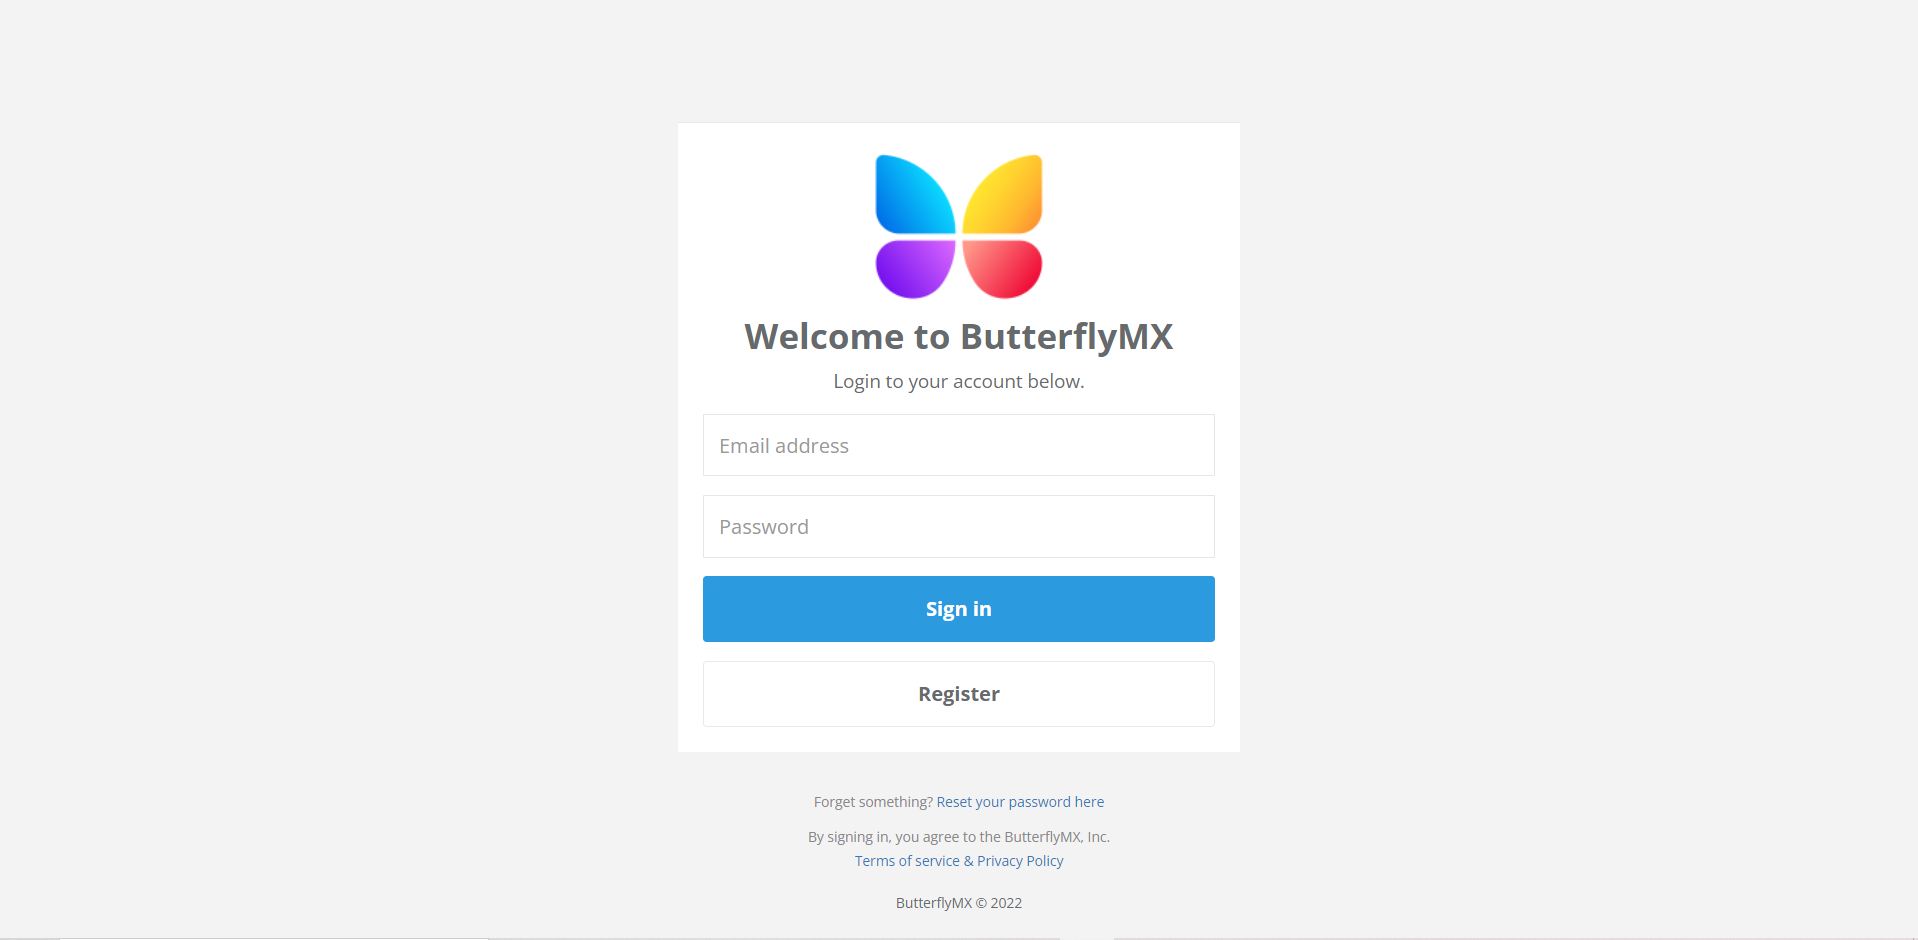 Enter your credentials to log into ButterflyMX